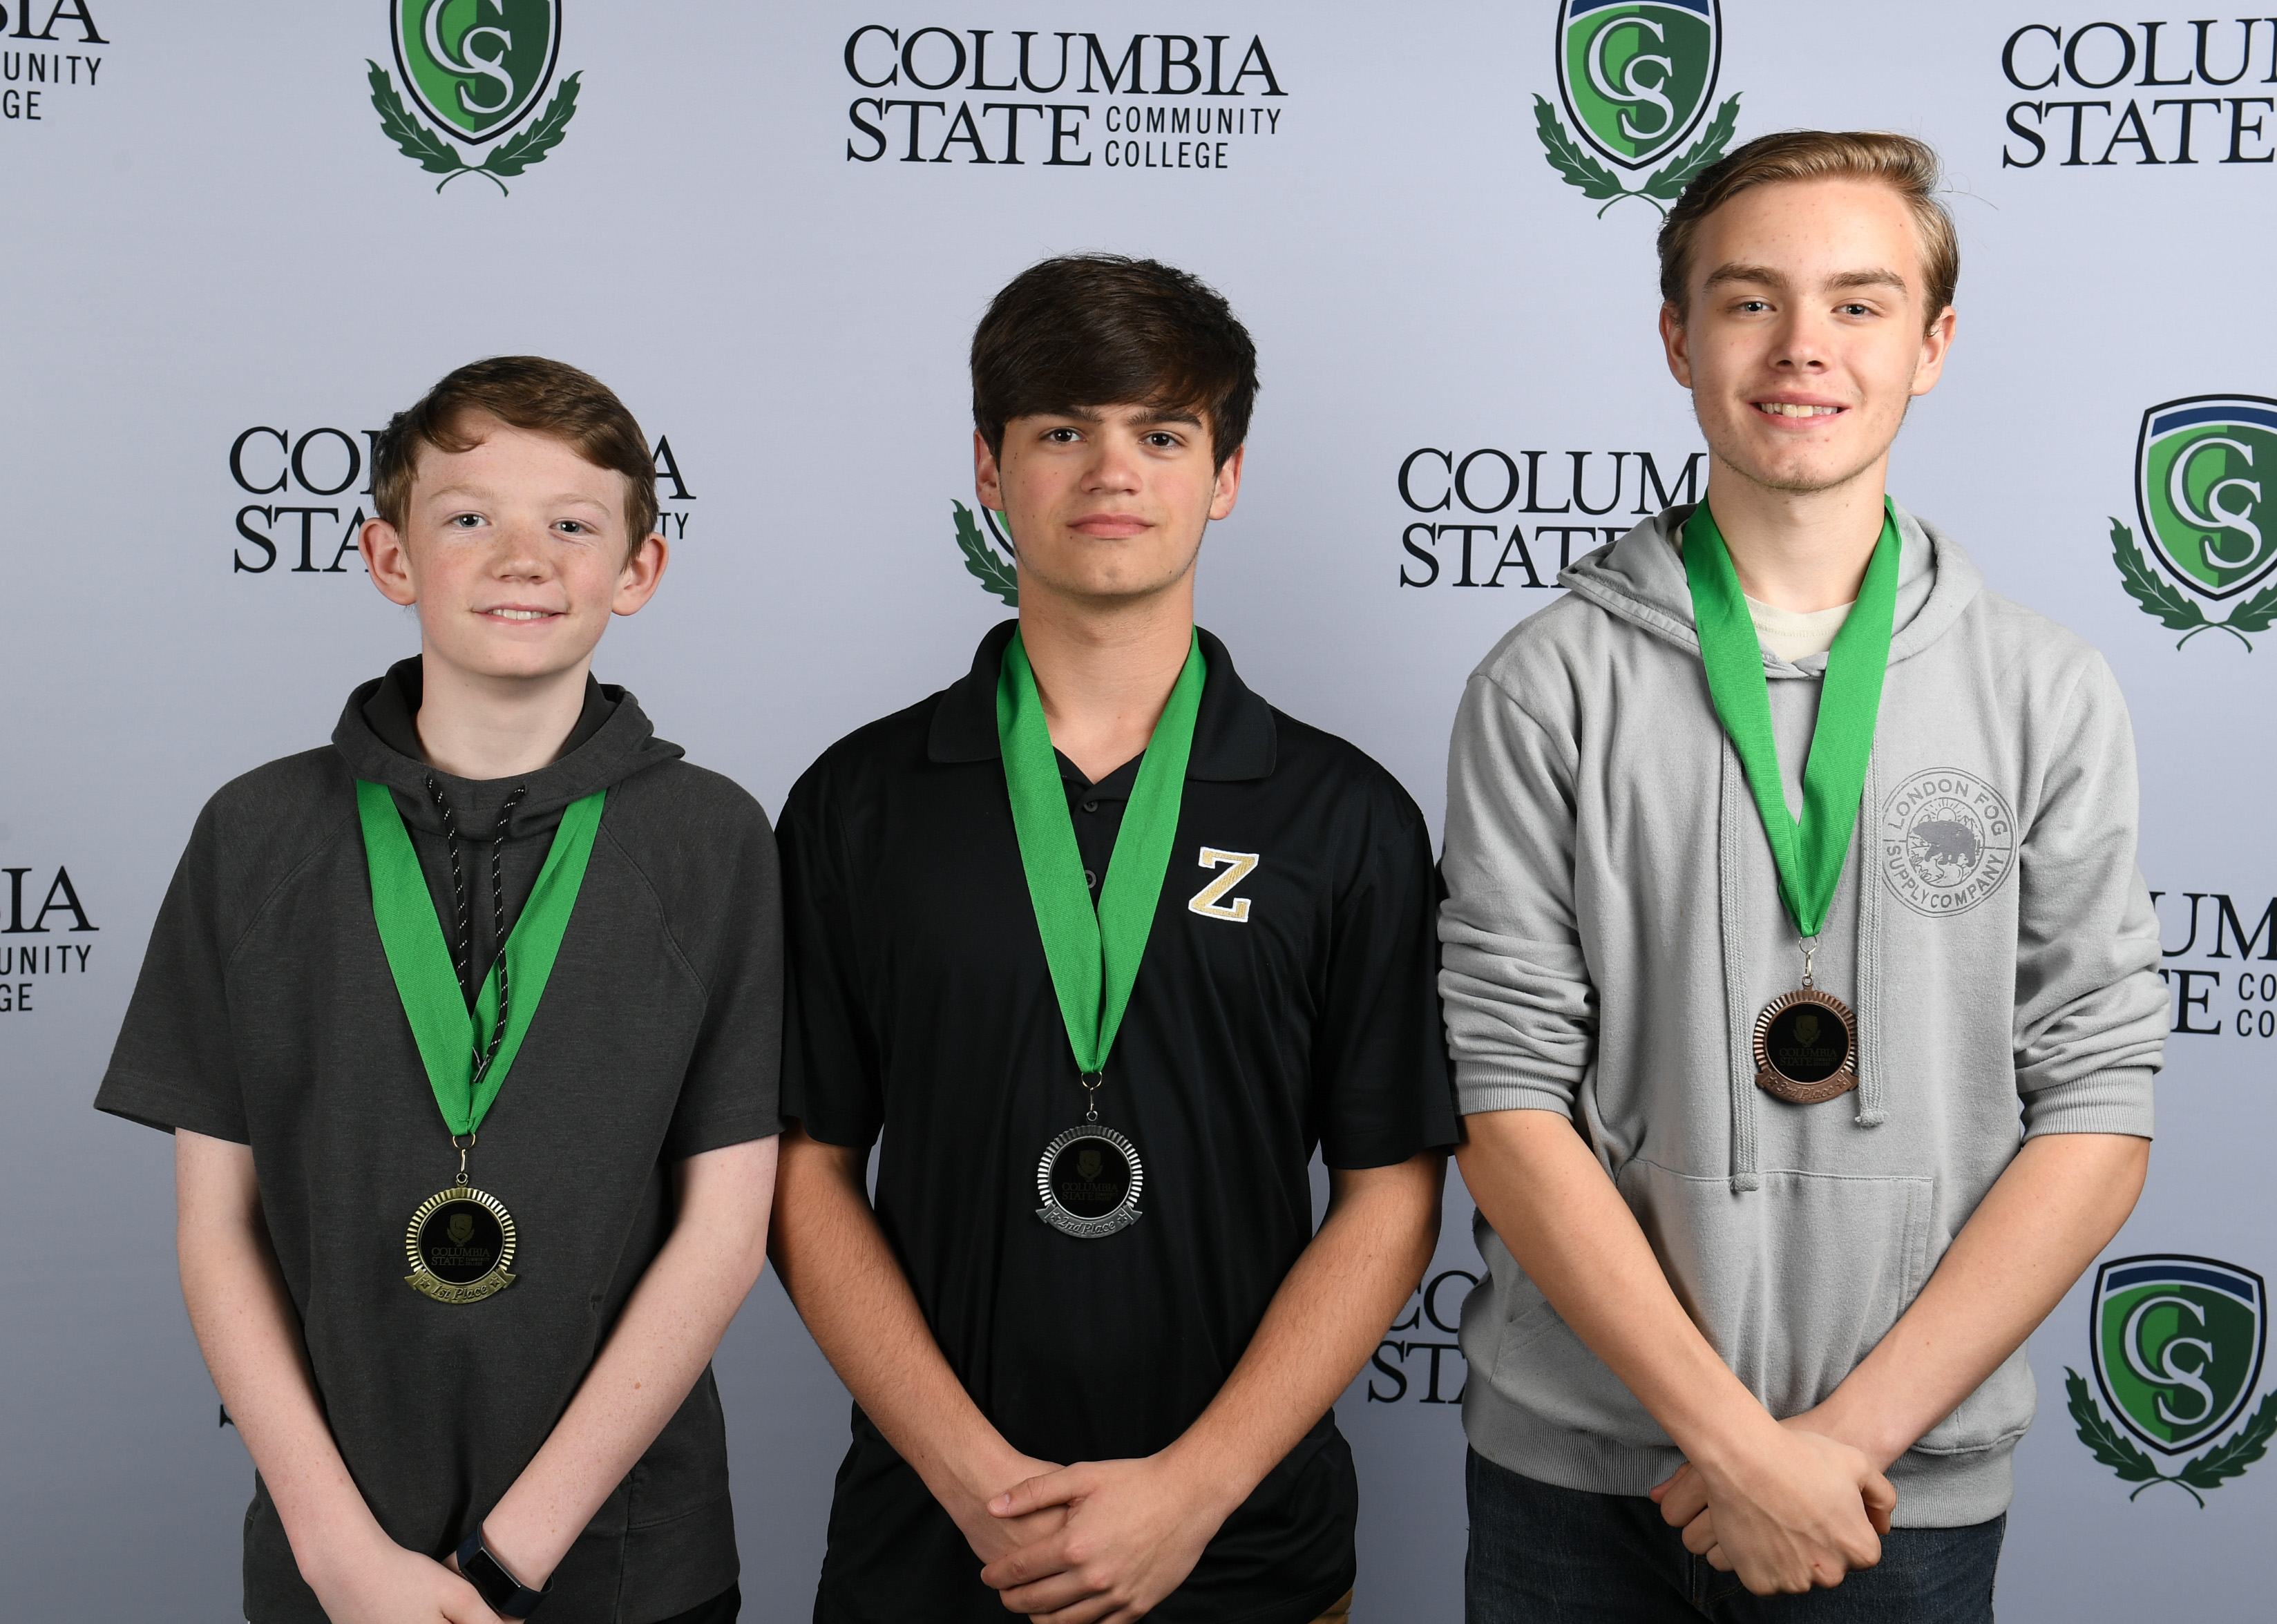 Algebra II Winners (left to right): First place winner, Nathan Hoggard of Summit High School; second place winner, Aiden Little of Zion Christian Academy; and third place winner, Matthew Sanders of East Hickman High School.